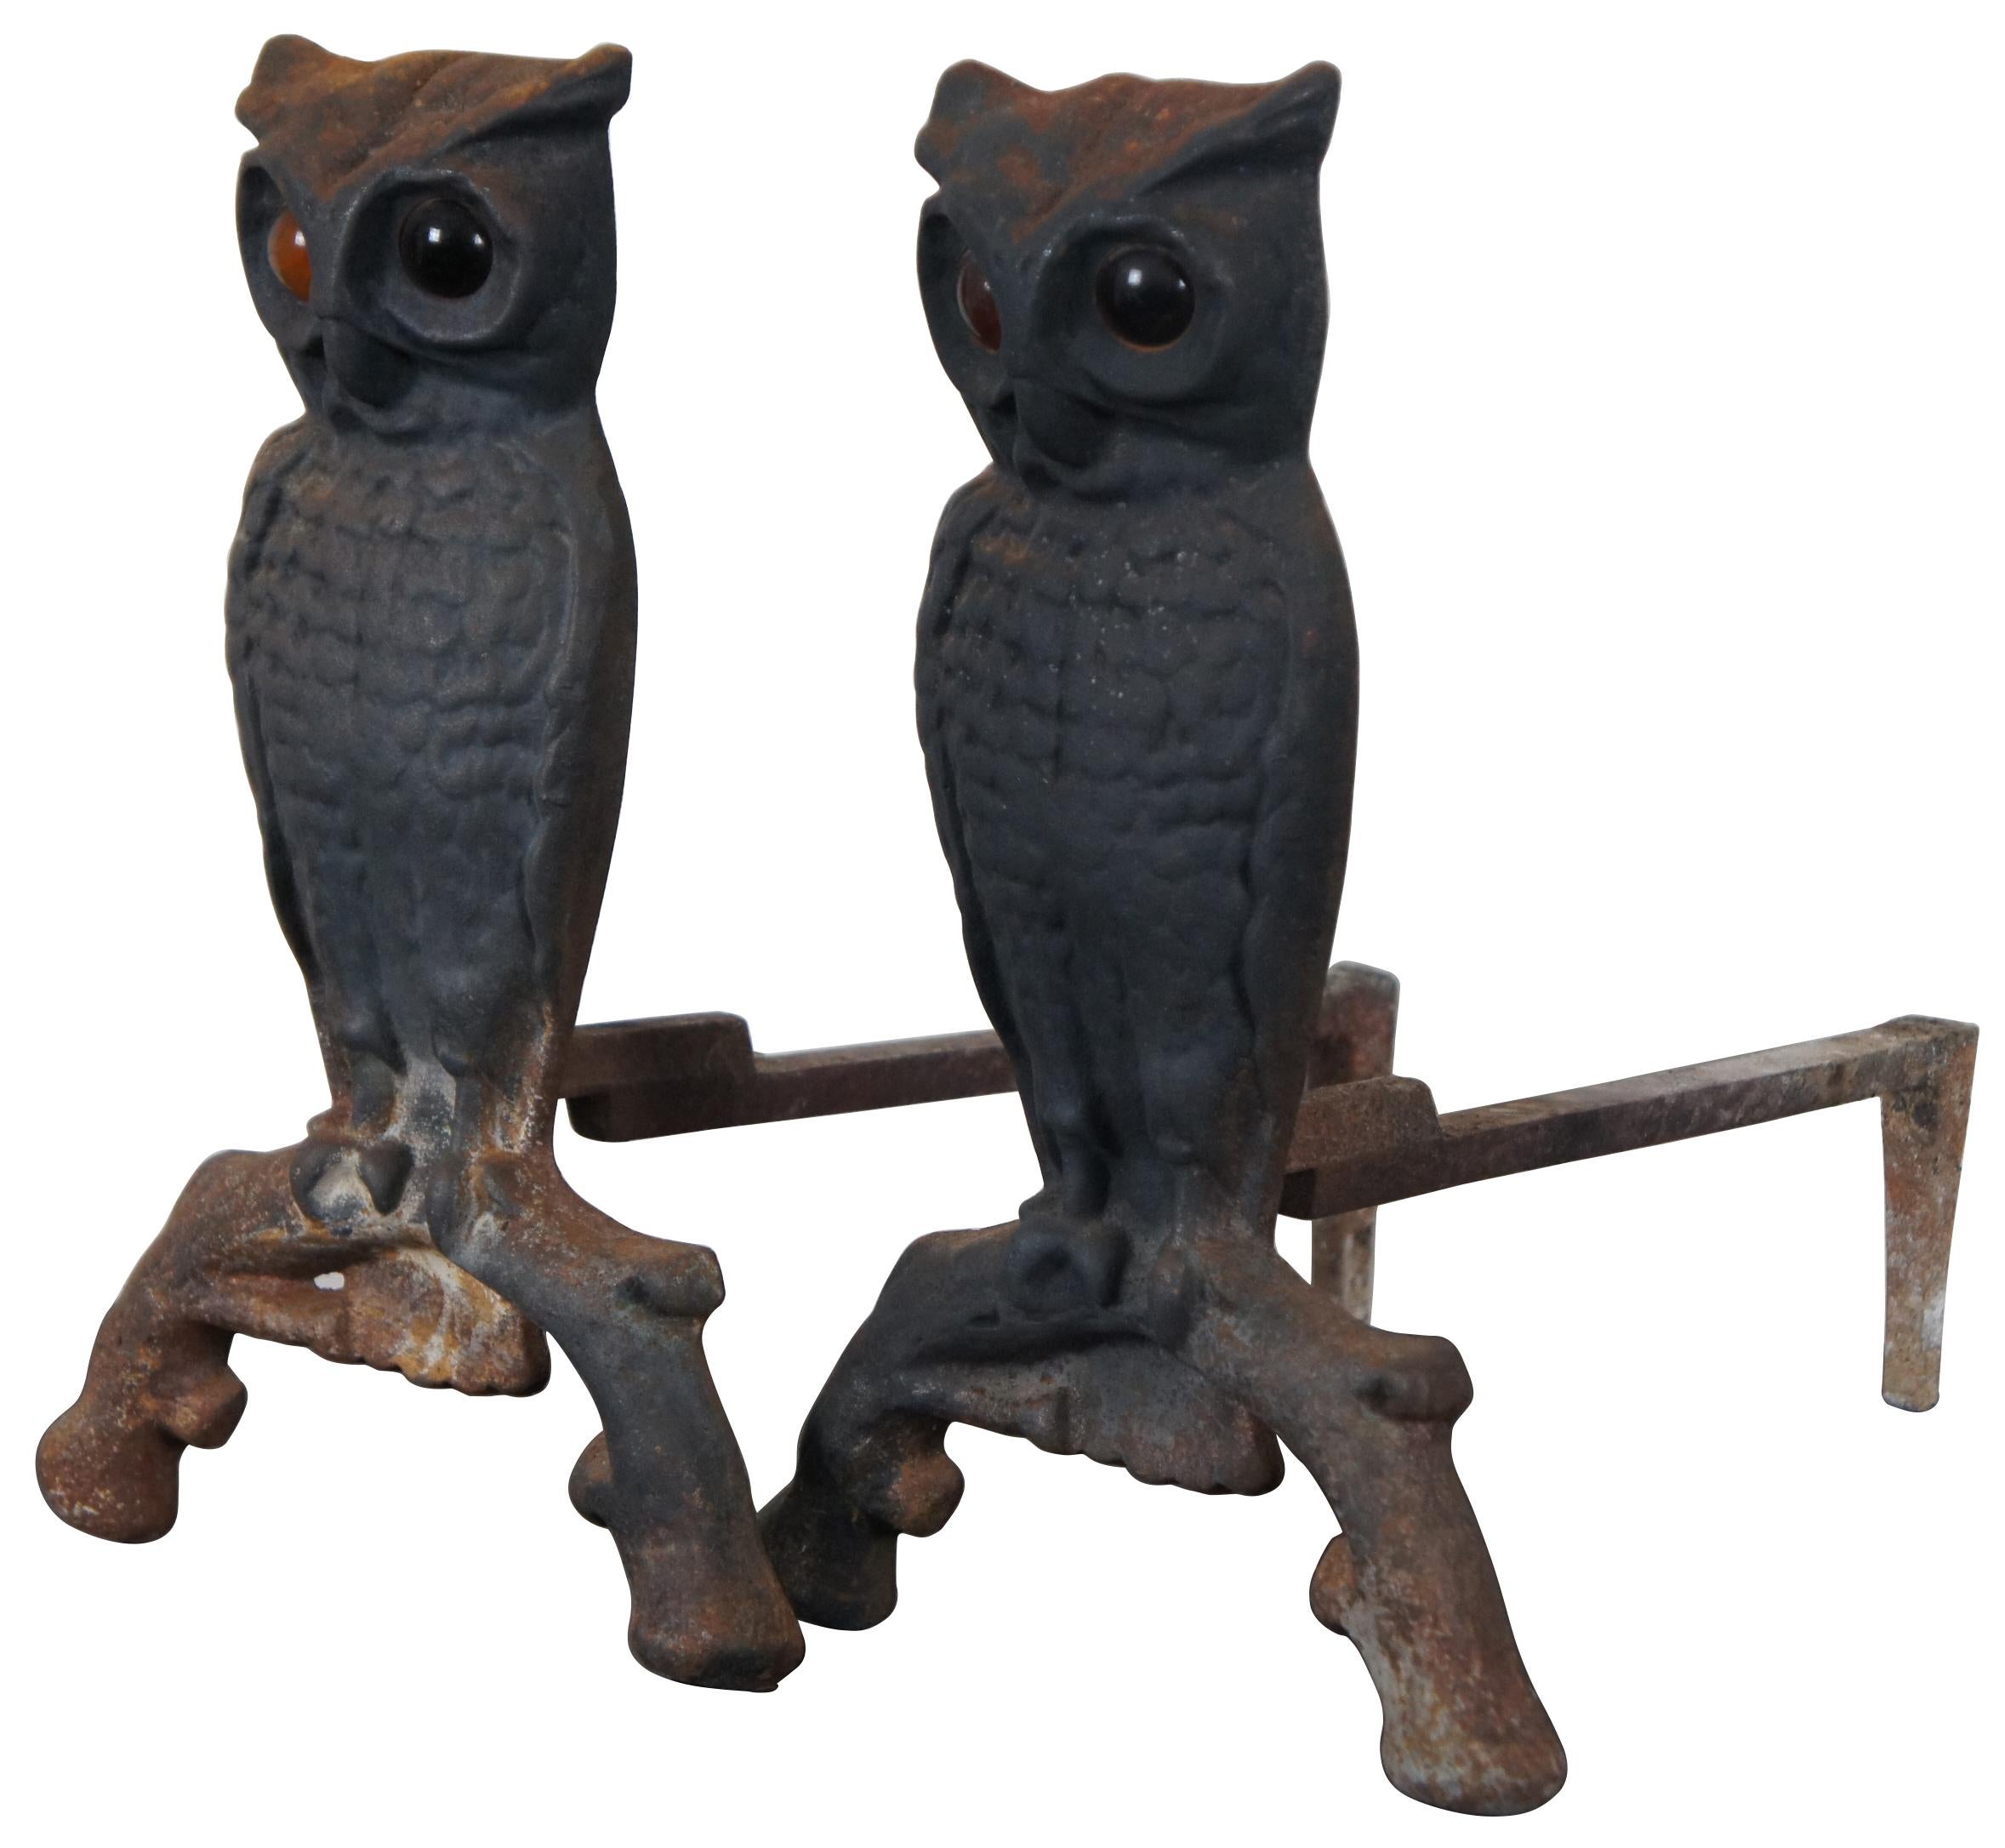 Pair of antique cast iron owl shaped fireplace andirons with orignal amber glass eyes. Measure: 13